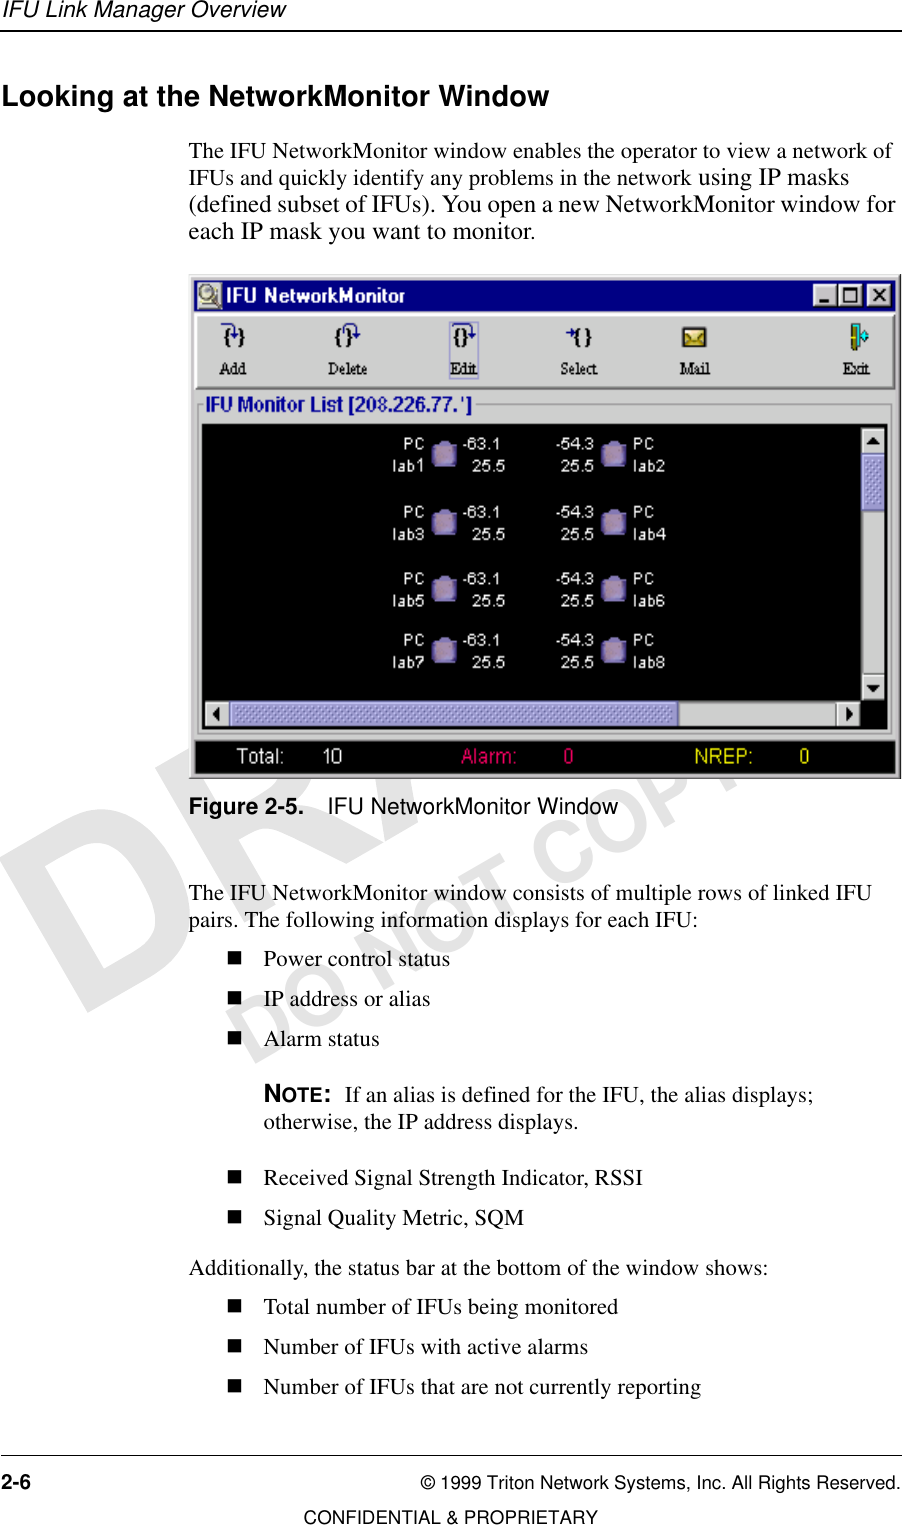 IFU Link Manager Overview2-6 © 1999 Triton Network Systems, Inc. All Rights Reserved.CONFIDENTIAL &amp; PROPRIETARYDO NOT COPYLooking at the NetworkMonitor WindowThe IFU NetworkMonitor window enables the operator to view a network of IFUs and quickly identify any problems in the network using IP masks (defined subset of IFUs). You open a new NetworkMonitor window for each IP mask you want to monitor. Figure 2-5. IFU NetworkMonitor WindowThe IFU NetworkMonitor window consists of multiple rows of linked IFU pairs. The following information displays for each IFU:nPower control statusnIP address or aliasnAlarm statusNOTE:  If an alias is defined for the IFU, the alias displays; otherwise, the IP address displays.nReceived Signal Strength Indicator, RSSInSignal Quality Metric, SQMAdditionally, the status bar at the bottom of the window shows:nTotal number of IFUs being monitorednNumber of IFUs with active alarmsnNumber of IFUs that are not currently reporting